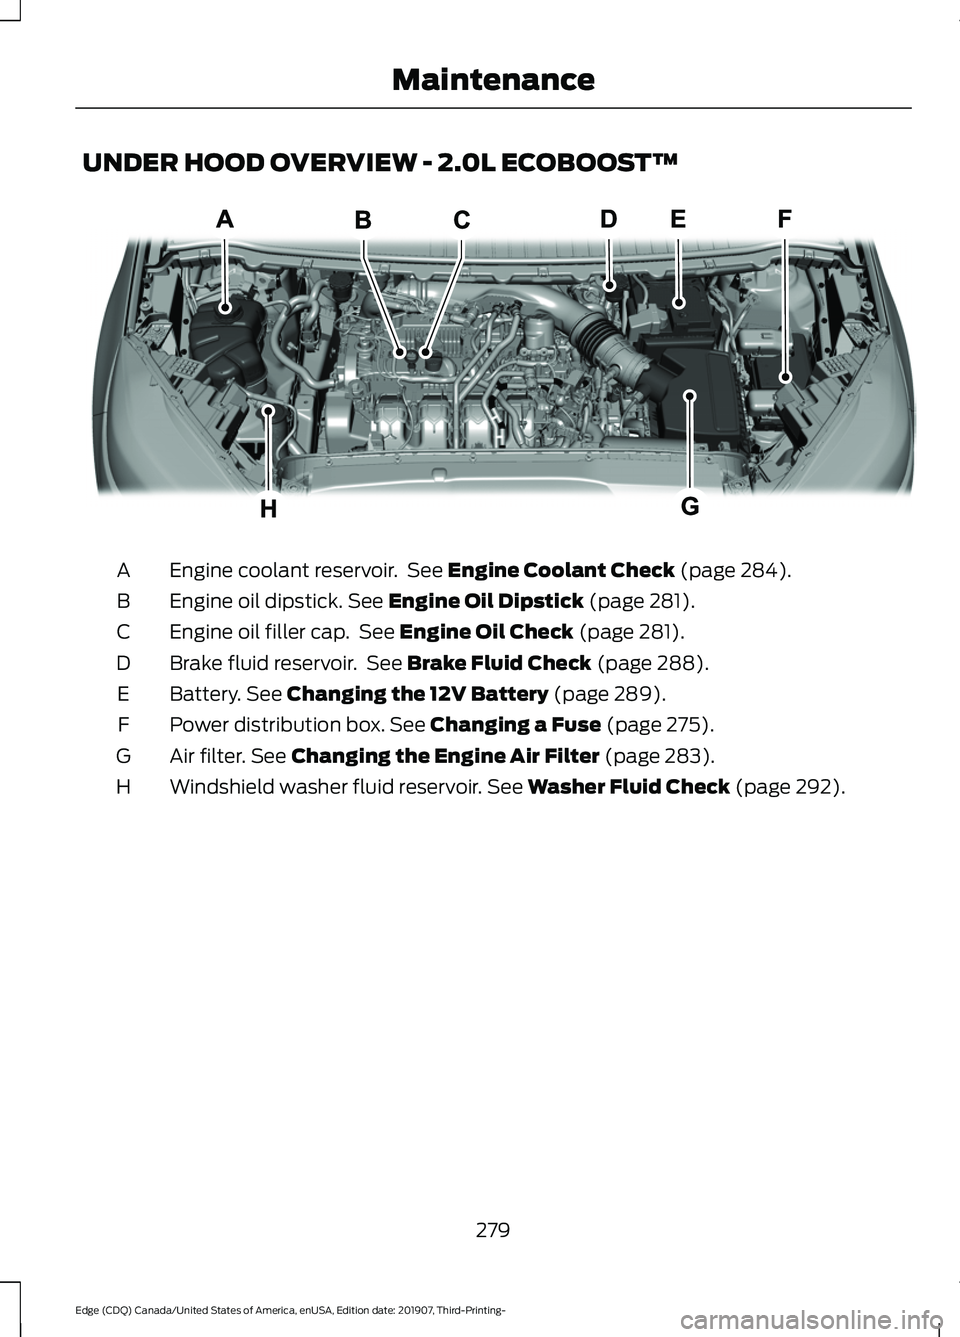 FORD EDGE 2020 Service Manual UNDER HOOD OVERVIEW - 2.0L ECOBOOST™
Engine coolant reservoir.  See Engine Coolant Check (page 284).
A
Engine oil dipstick.
 See Engine Oil Dipstick (page 281).
B
Engine oil filler cap.  See 
Engine